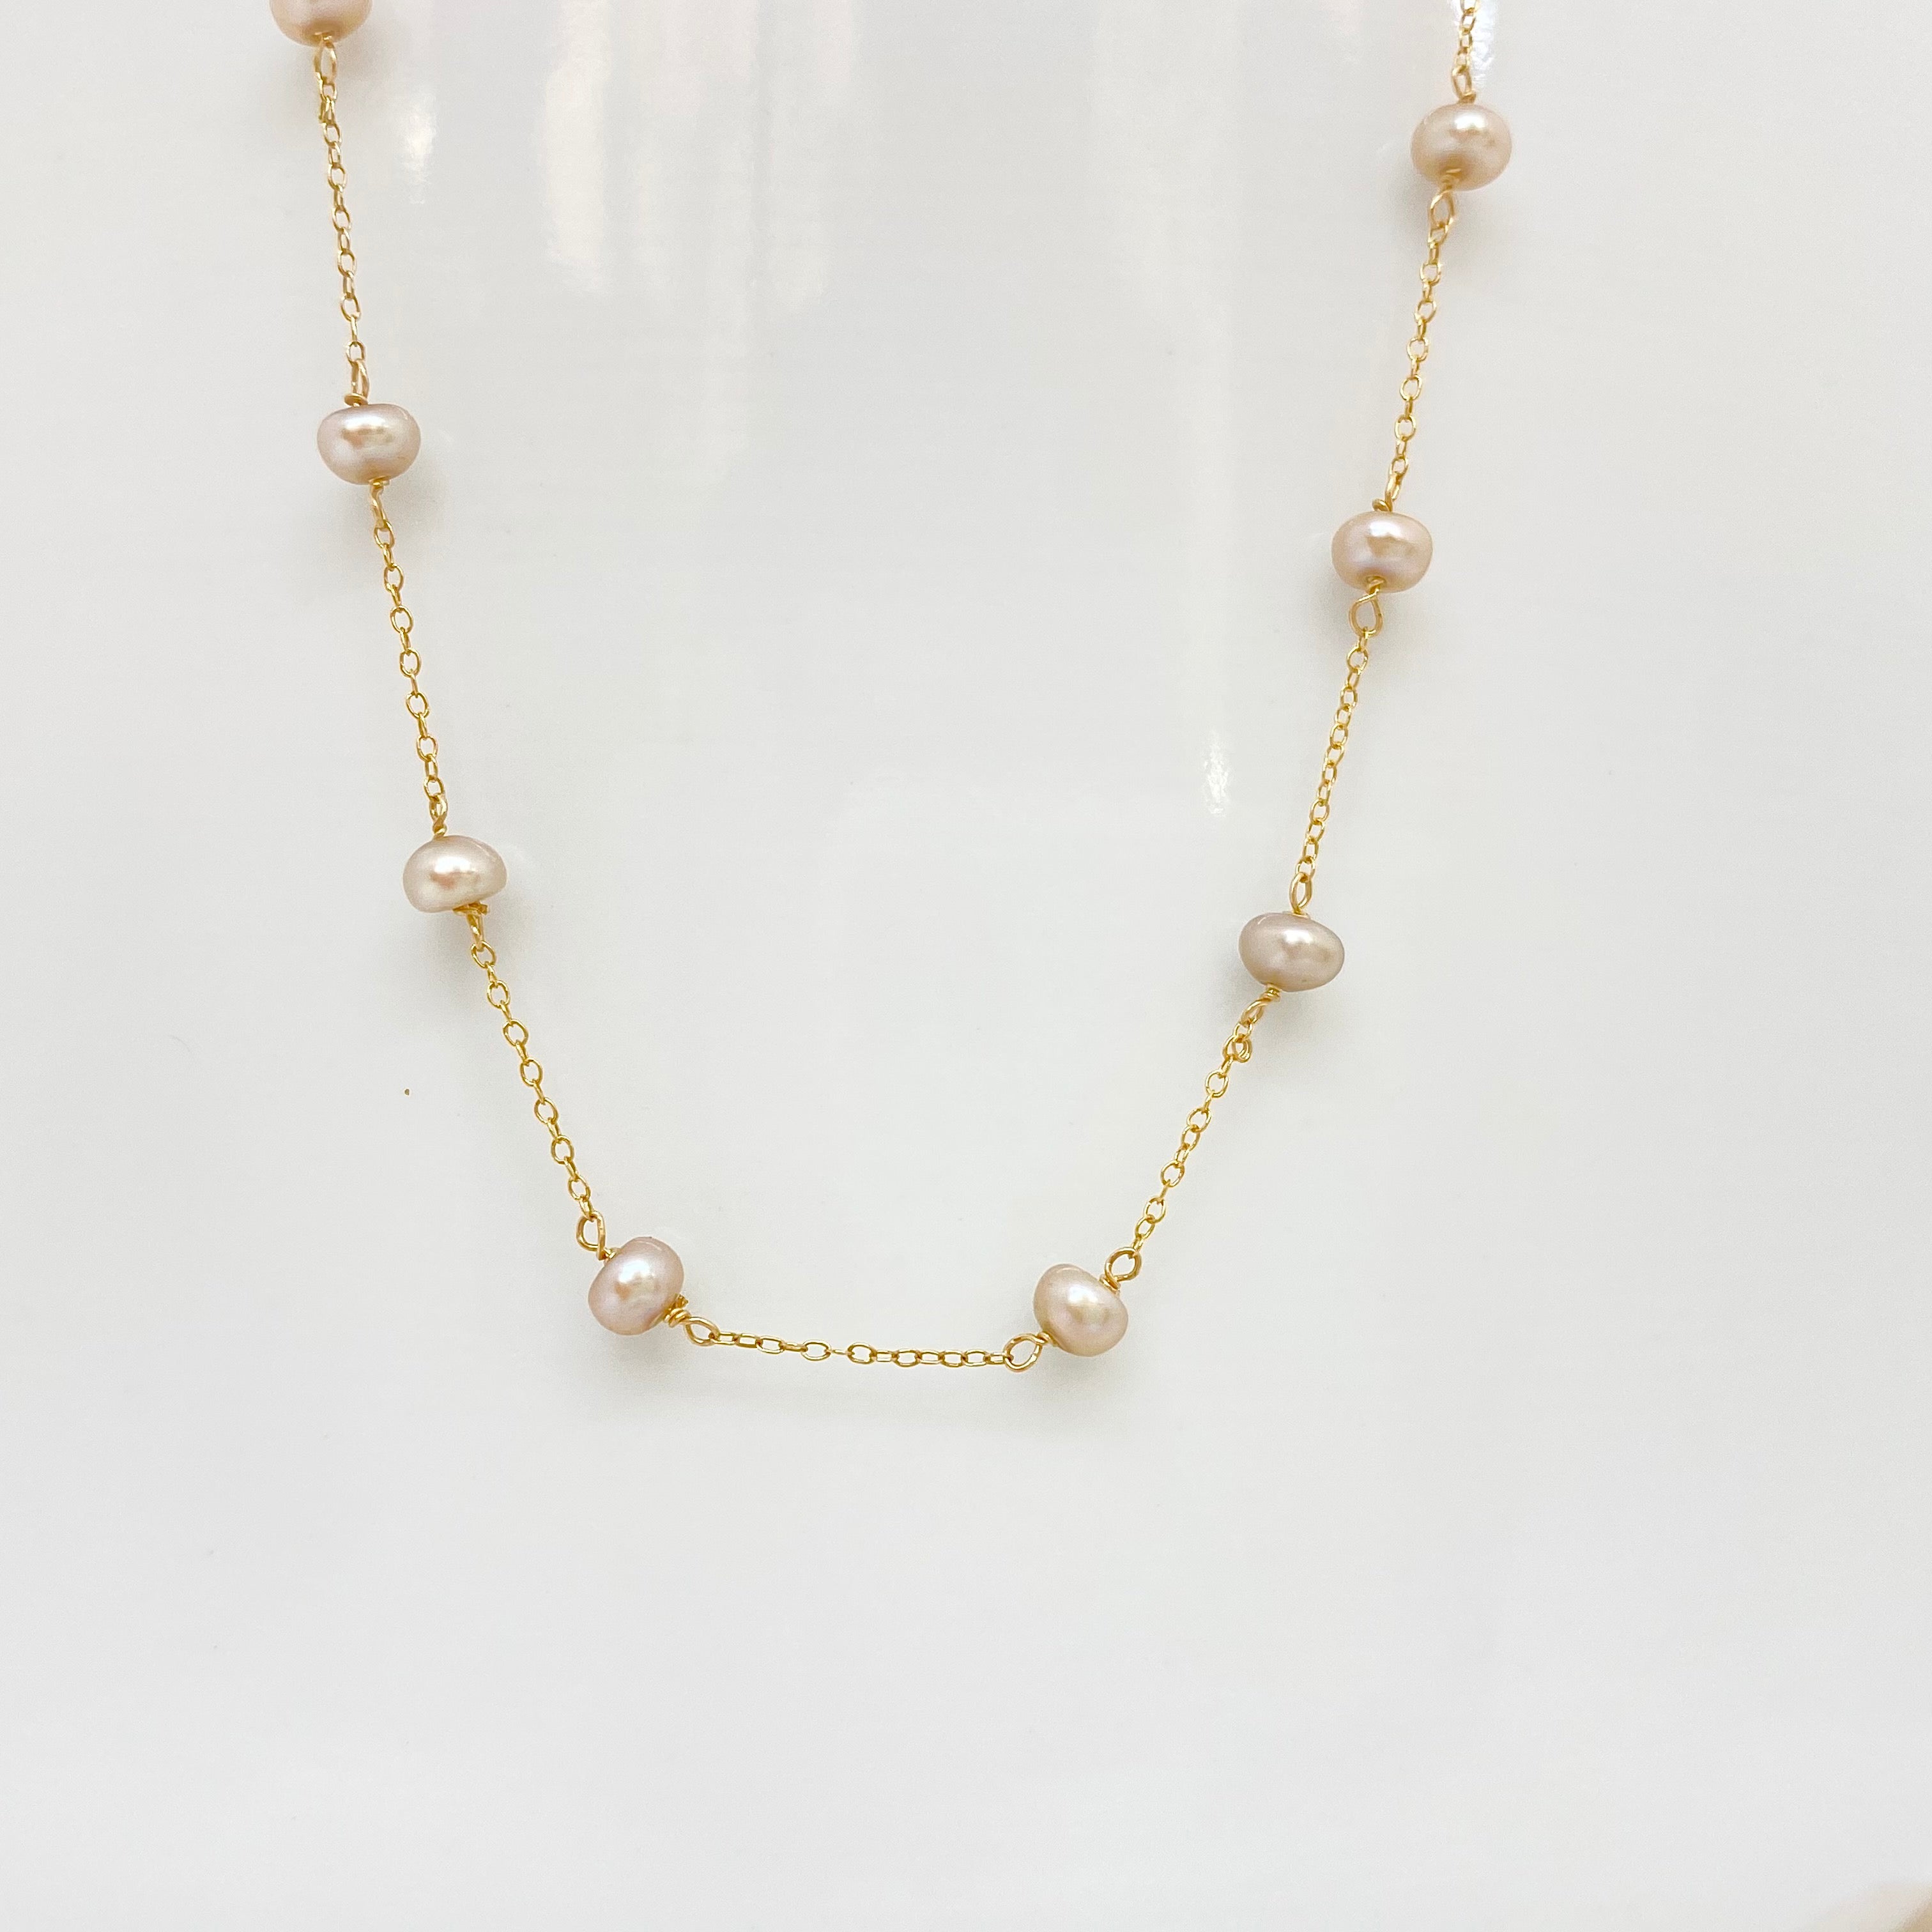 14k Gold Chain Necklace w/ Freshwater Pearls